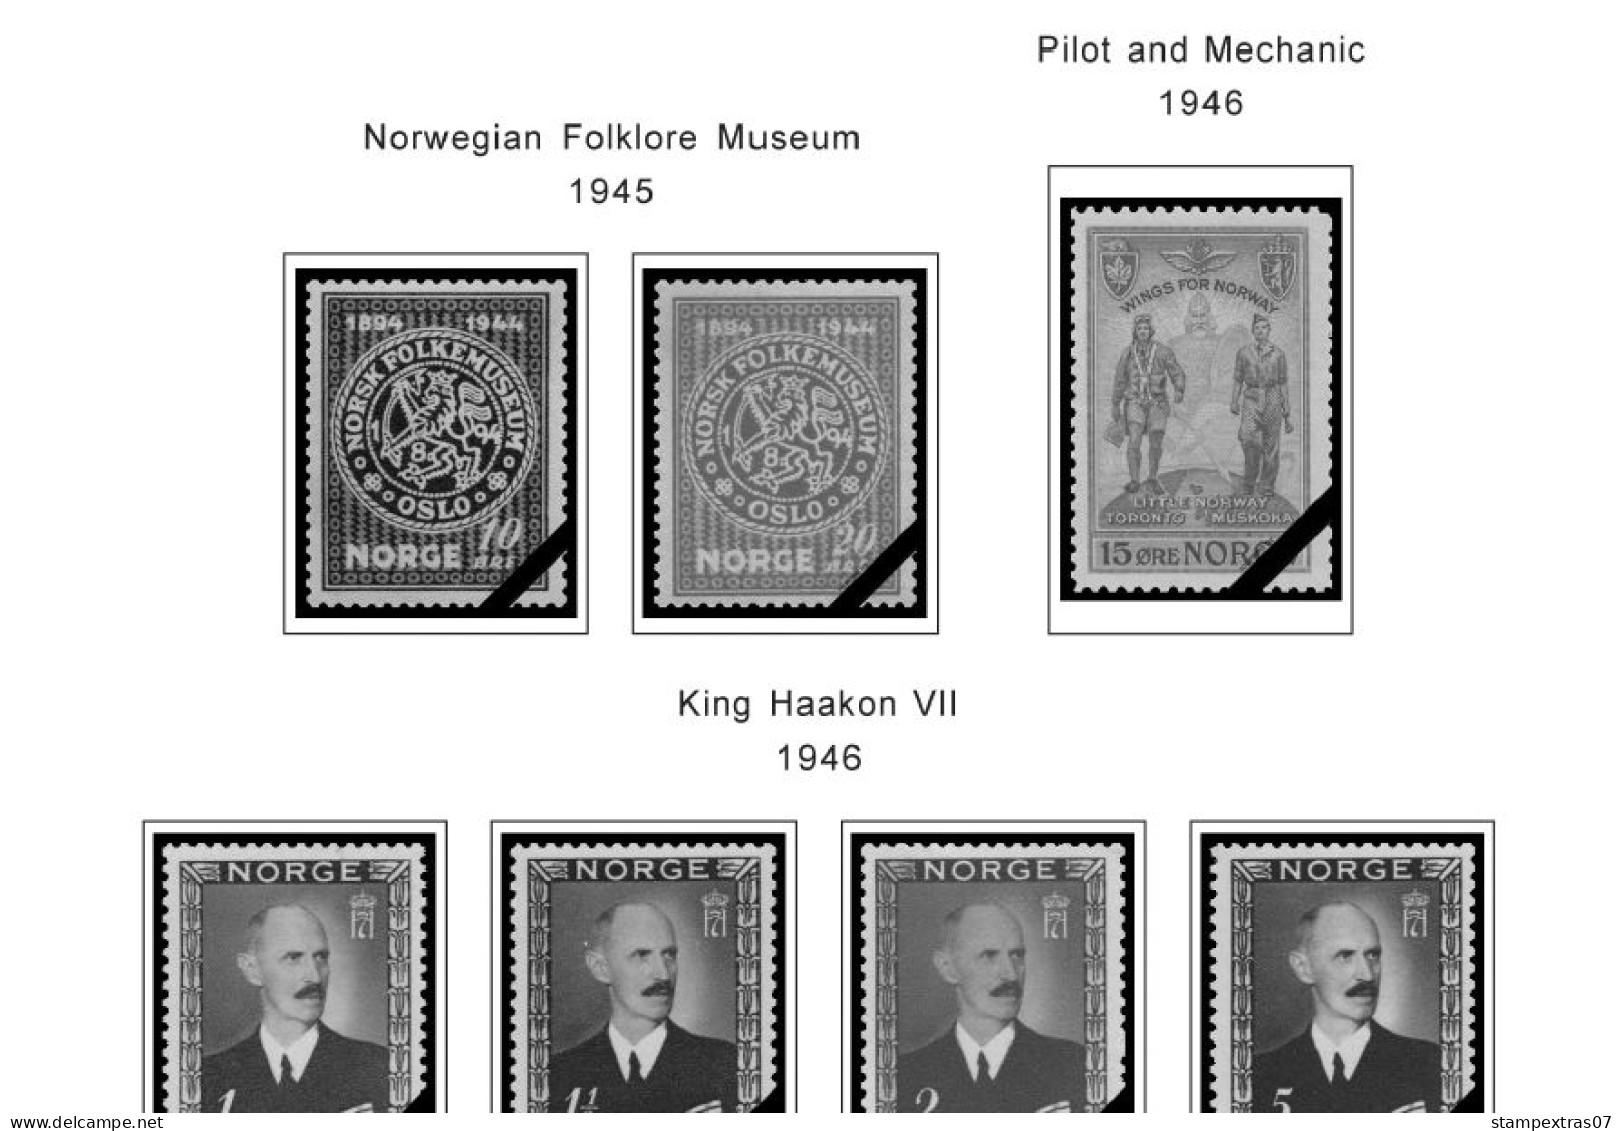 NORWAY 1855-2010 STAMP ALBUM PAGES (183 b&w illustrated pages)